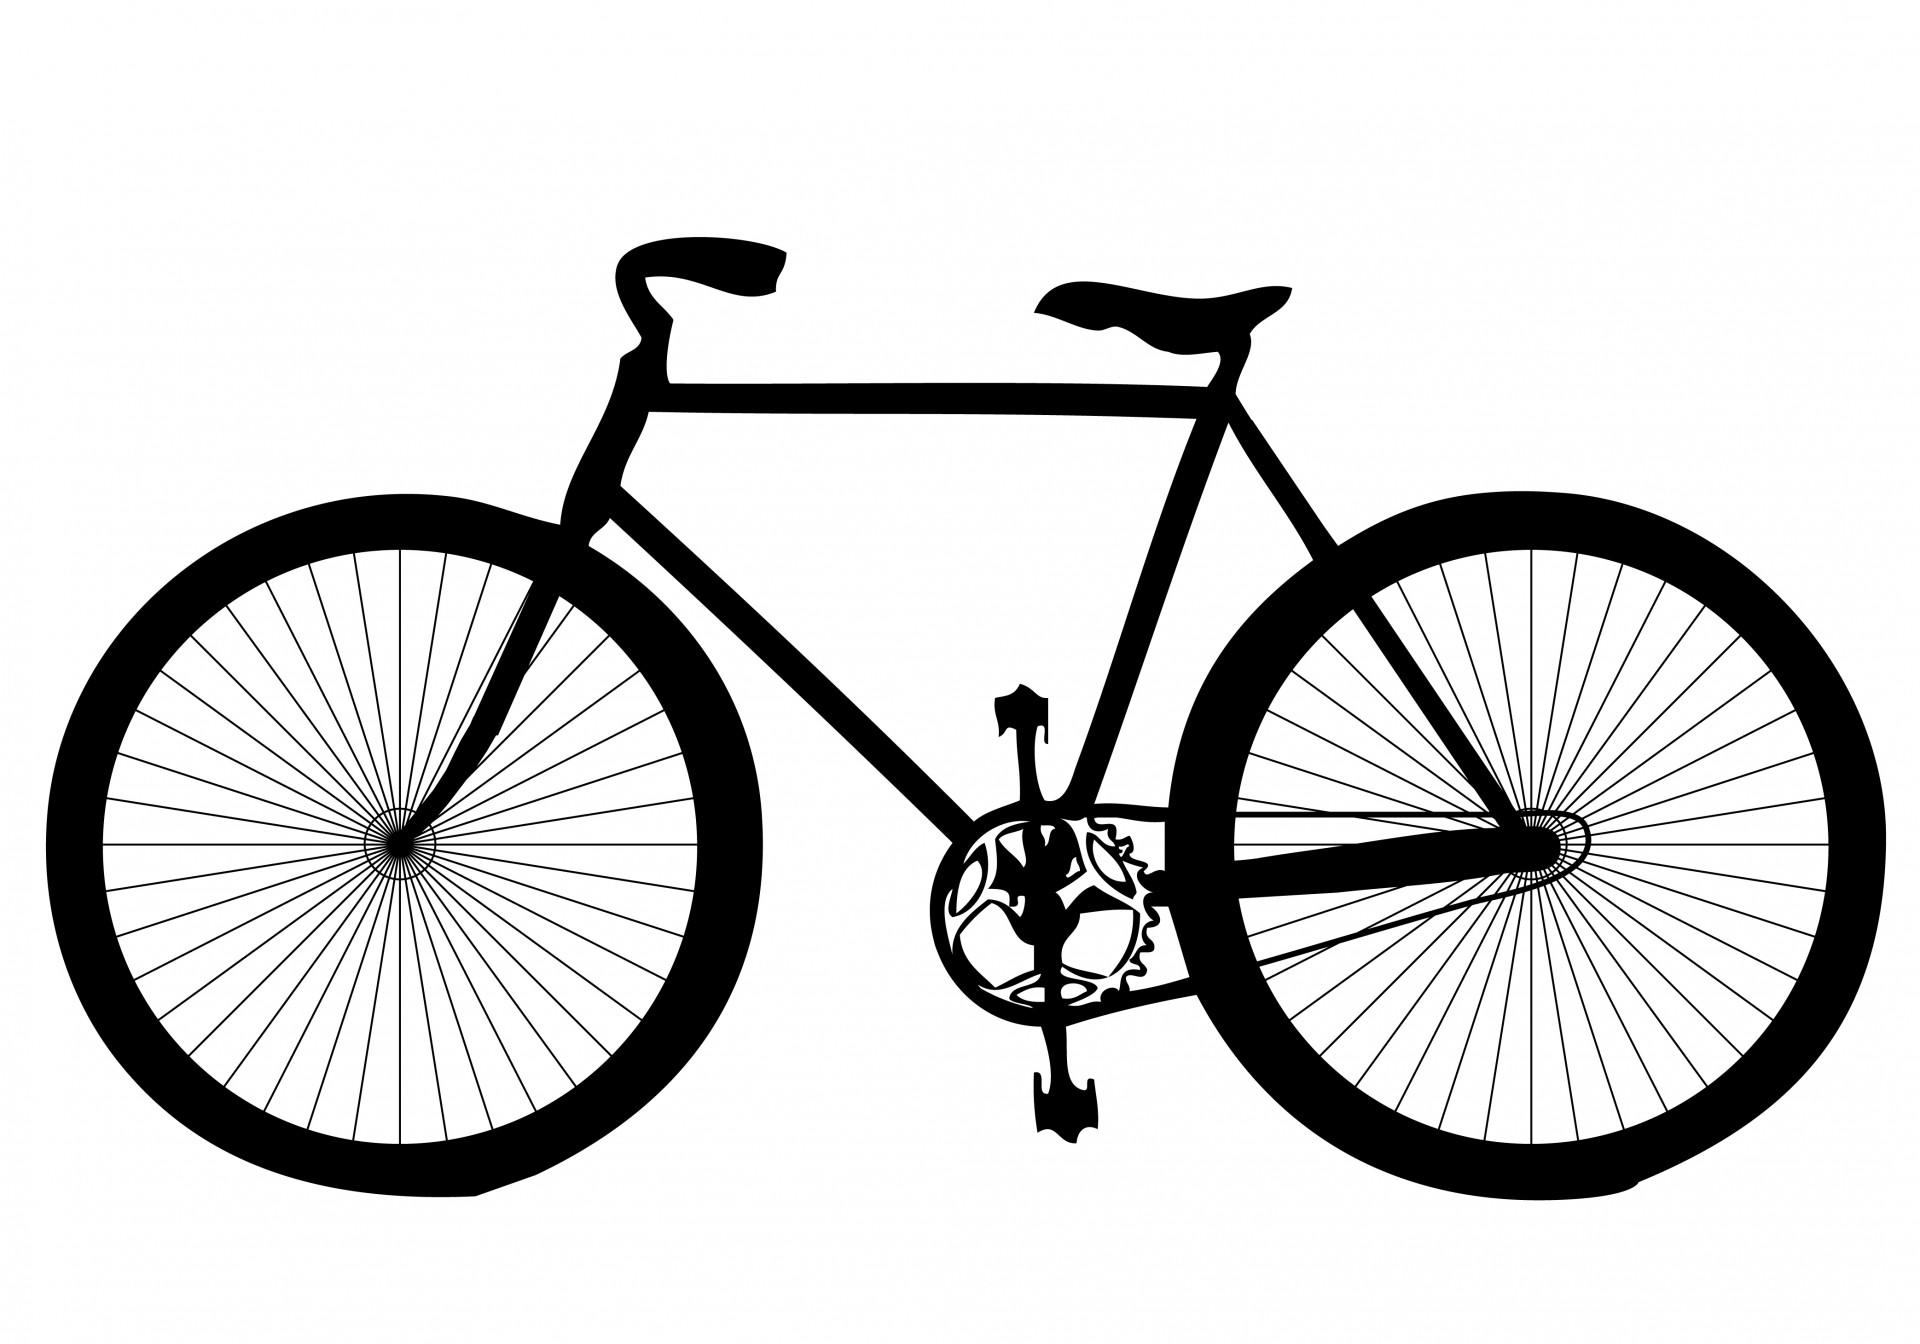 Bike bicycle clip art vector bicycle graphics clipart me ...